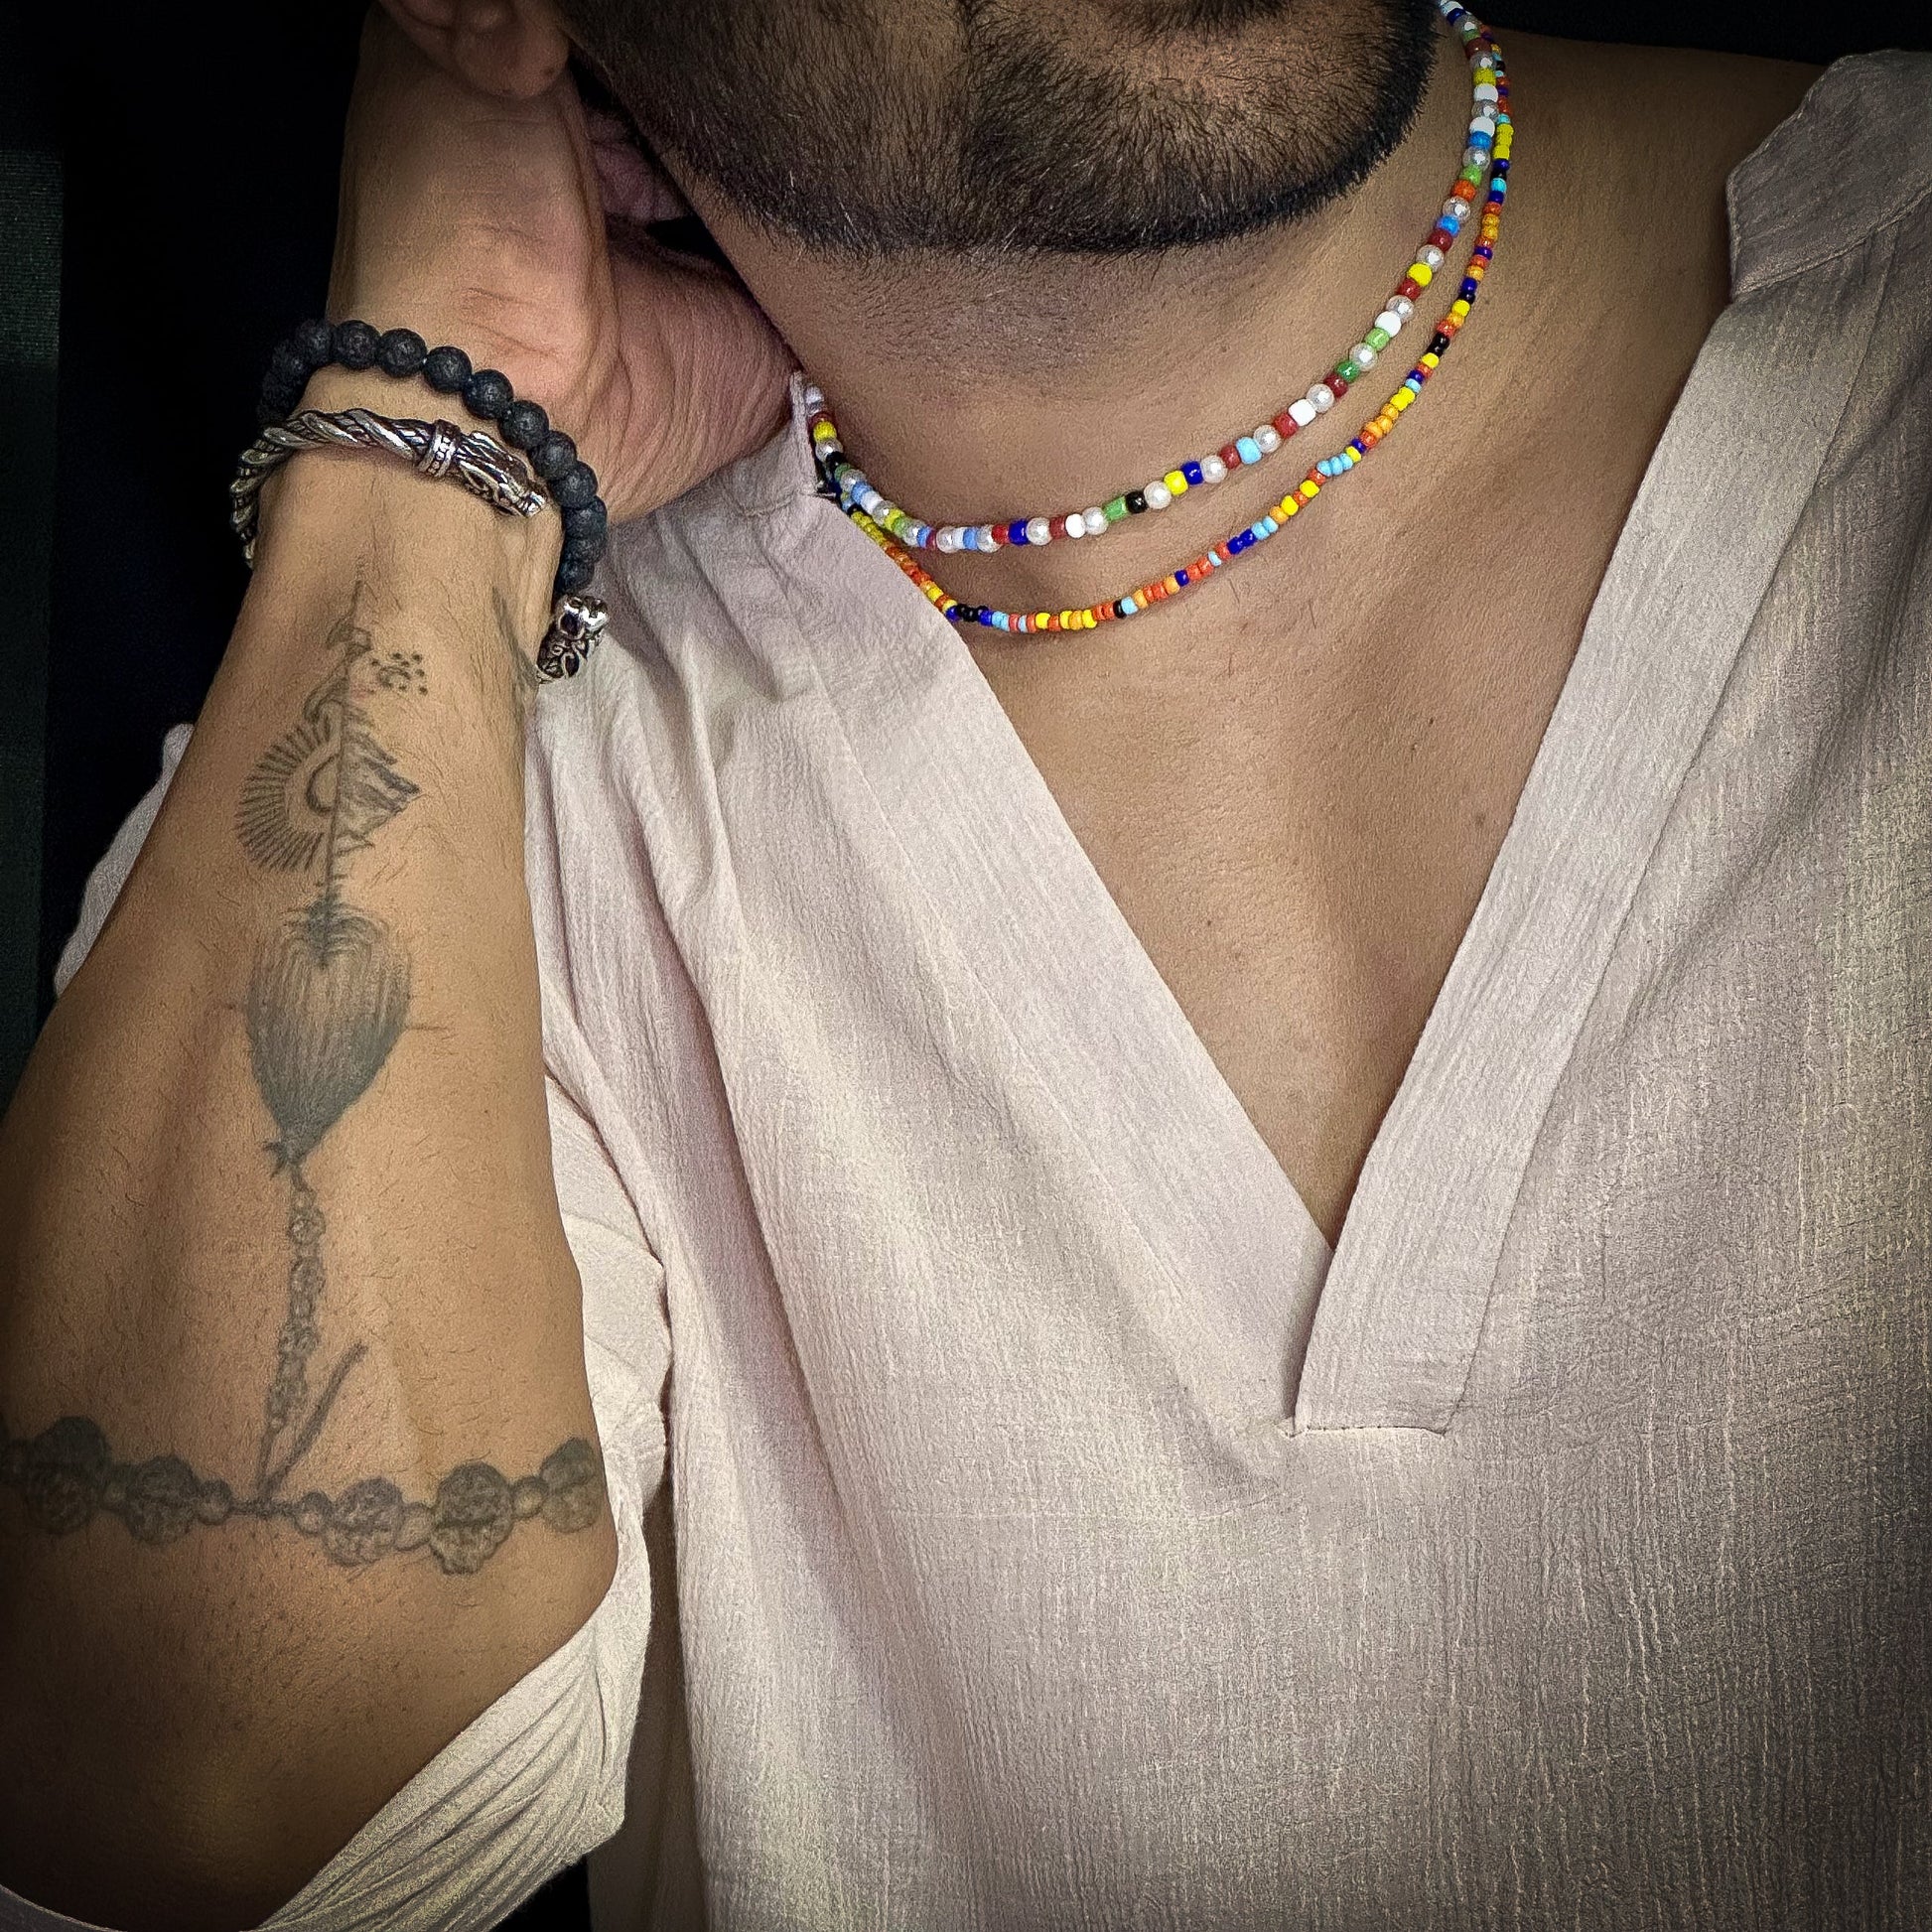 Boho Style Colour - Multi-Layer Beads Necklace For Men & Boys (21 And 24 Inch)